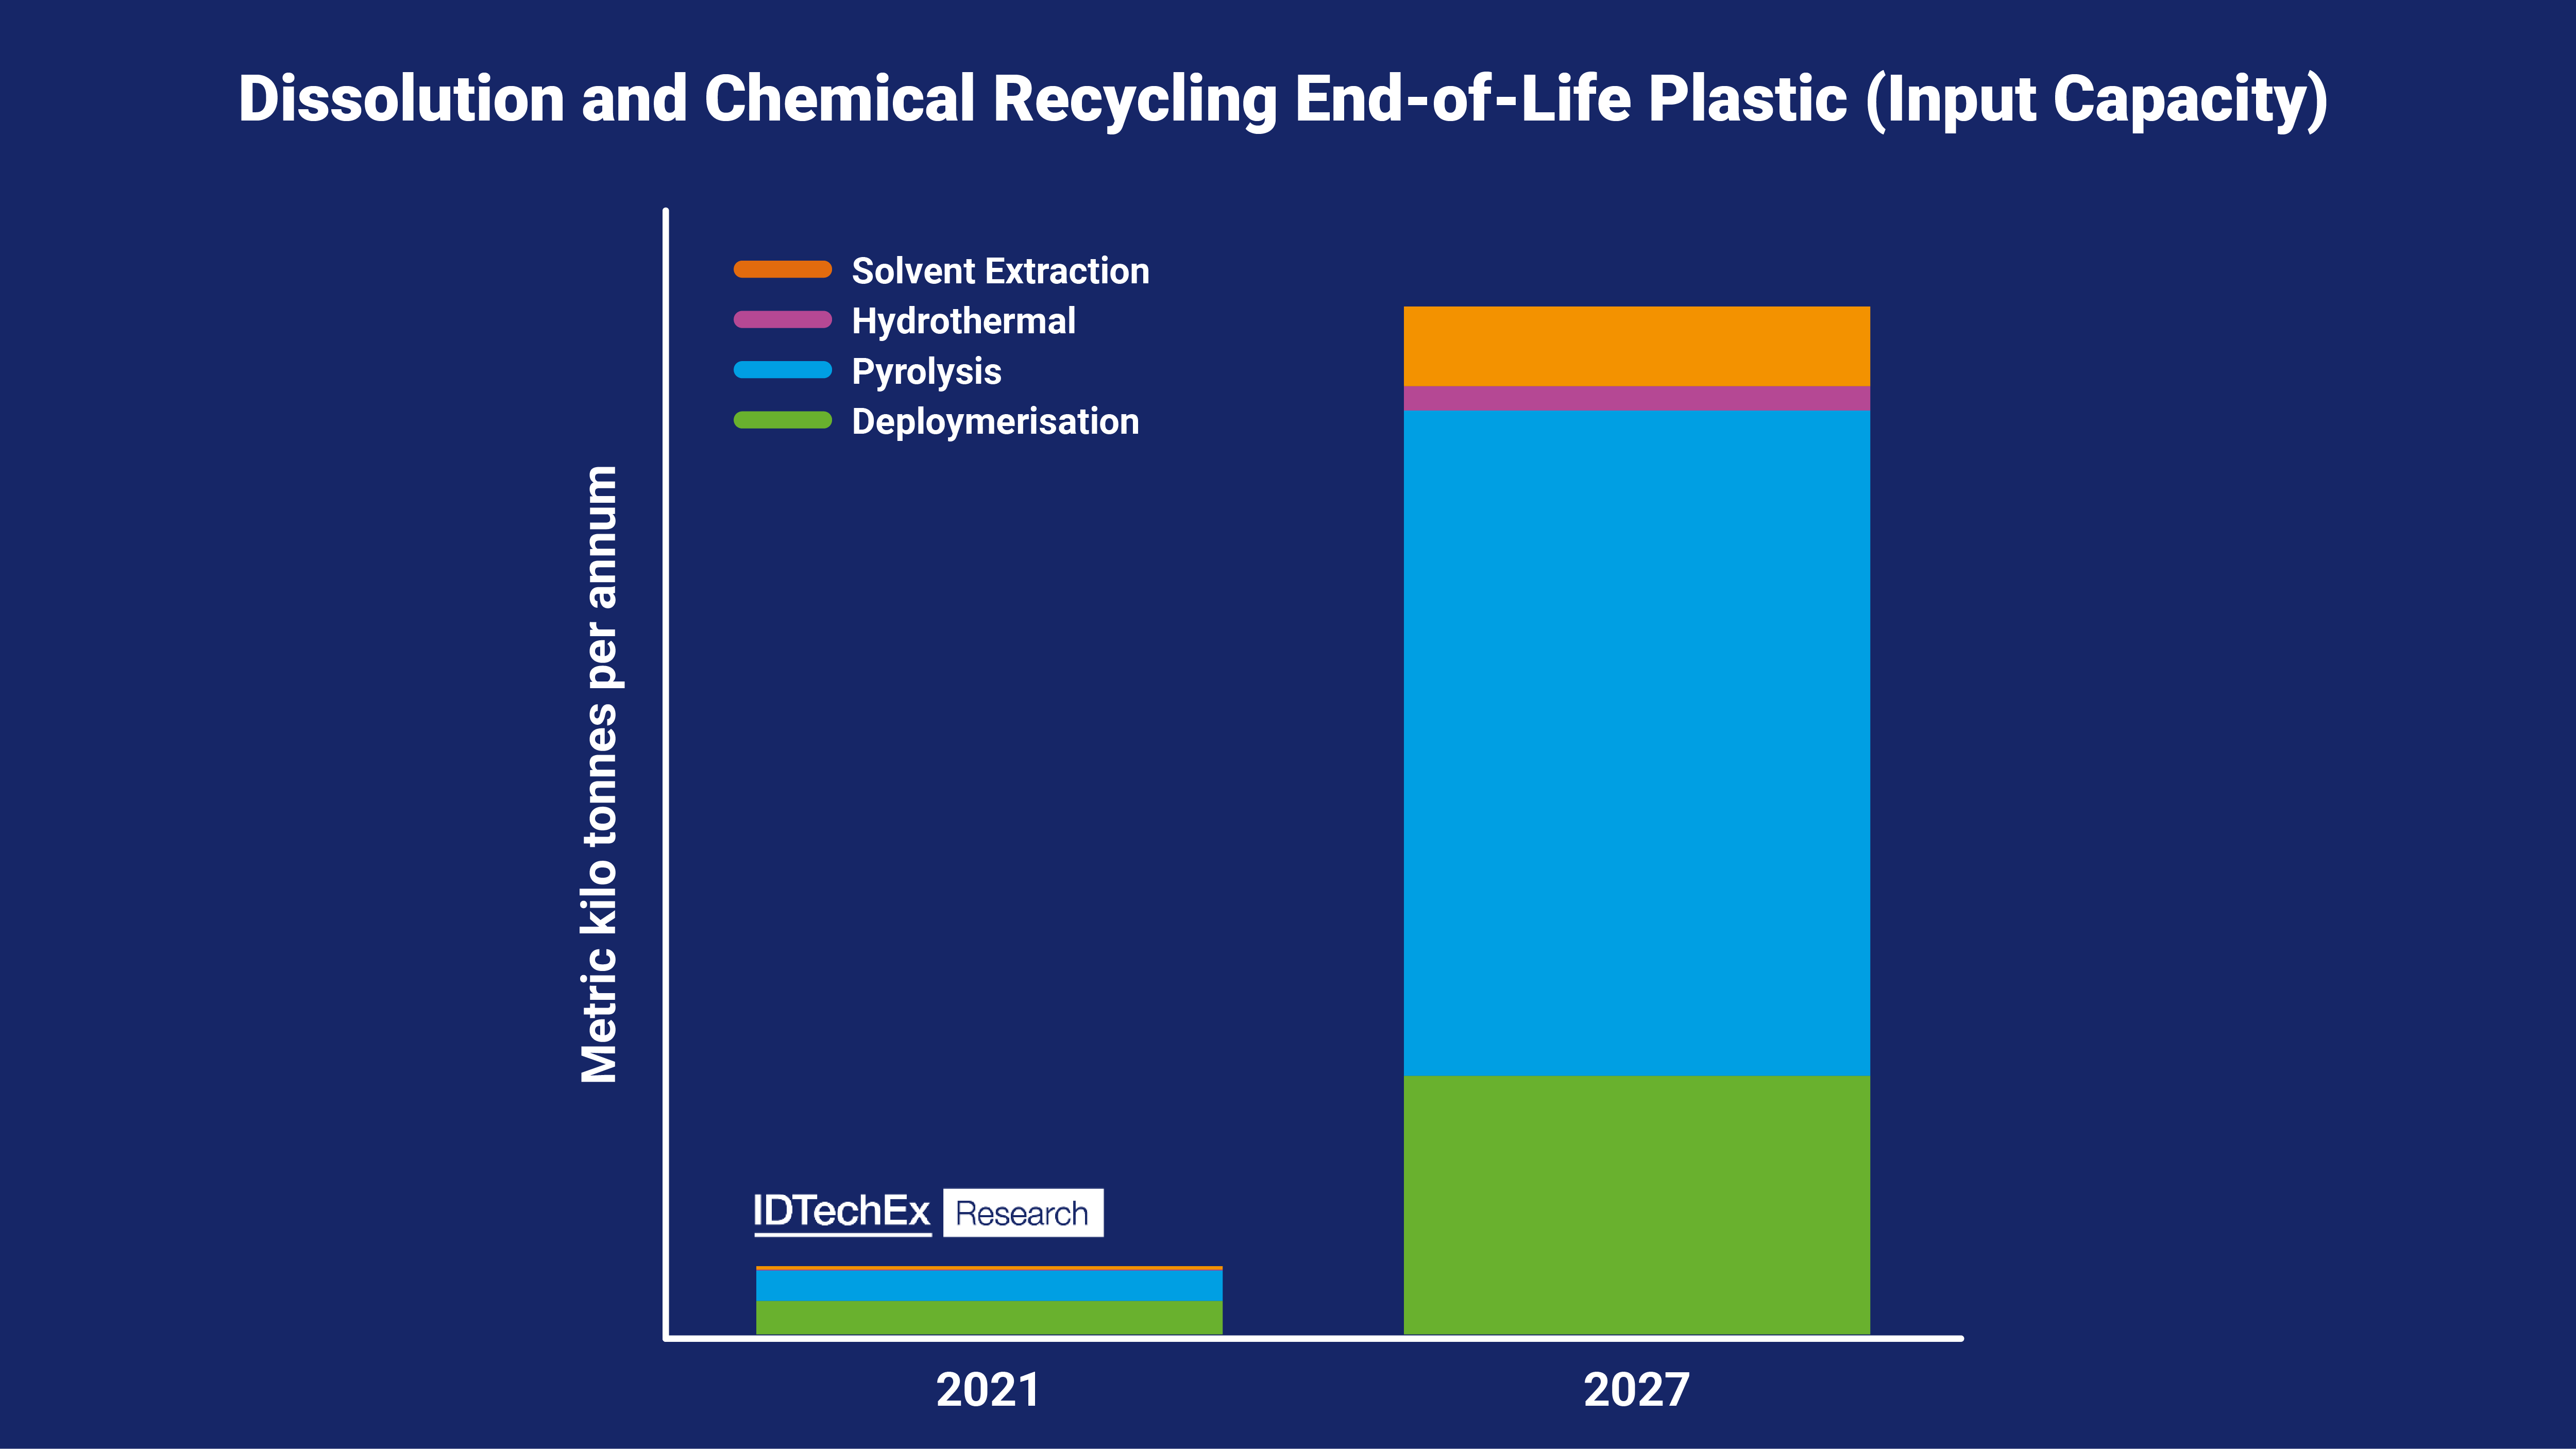 Dissolution and chemical recycling end-of-life plastic (input capacity). Source: IDTechEx